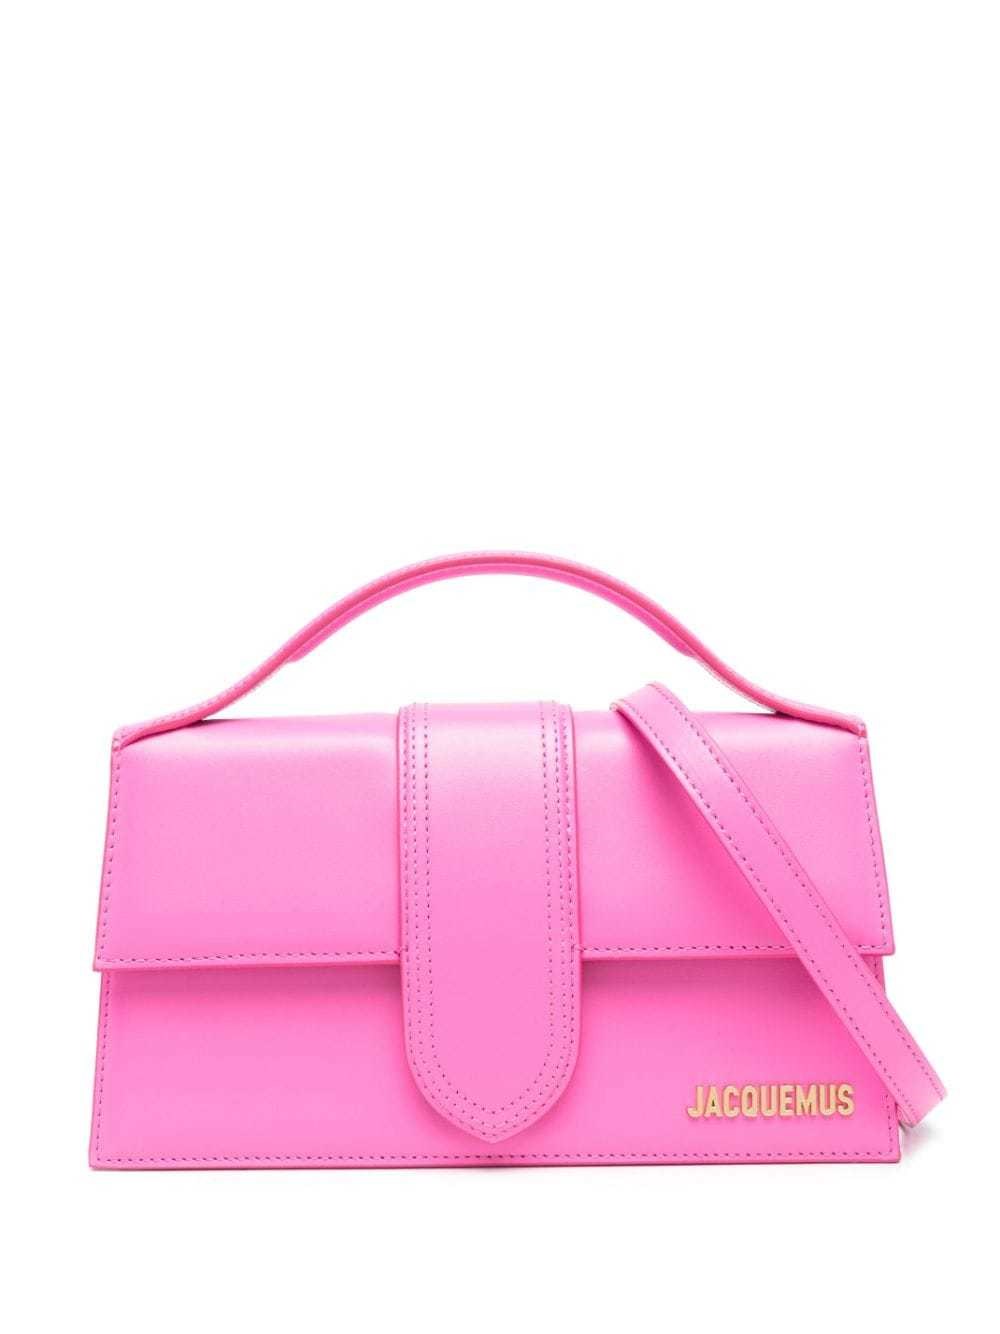 Jacquemus Le Grand Child Tote Bag In Pink & Purple